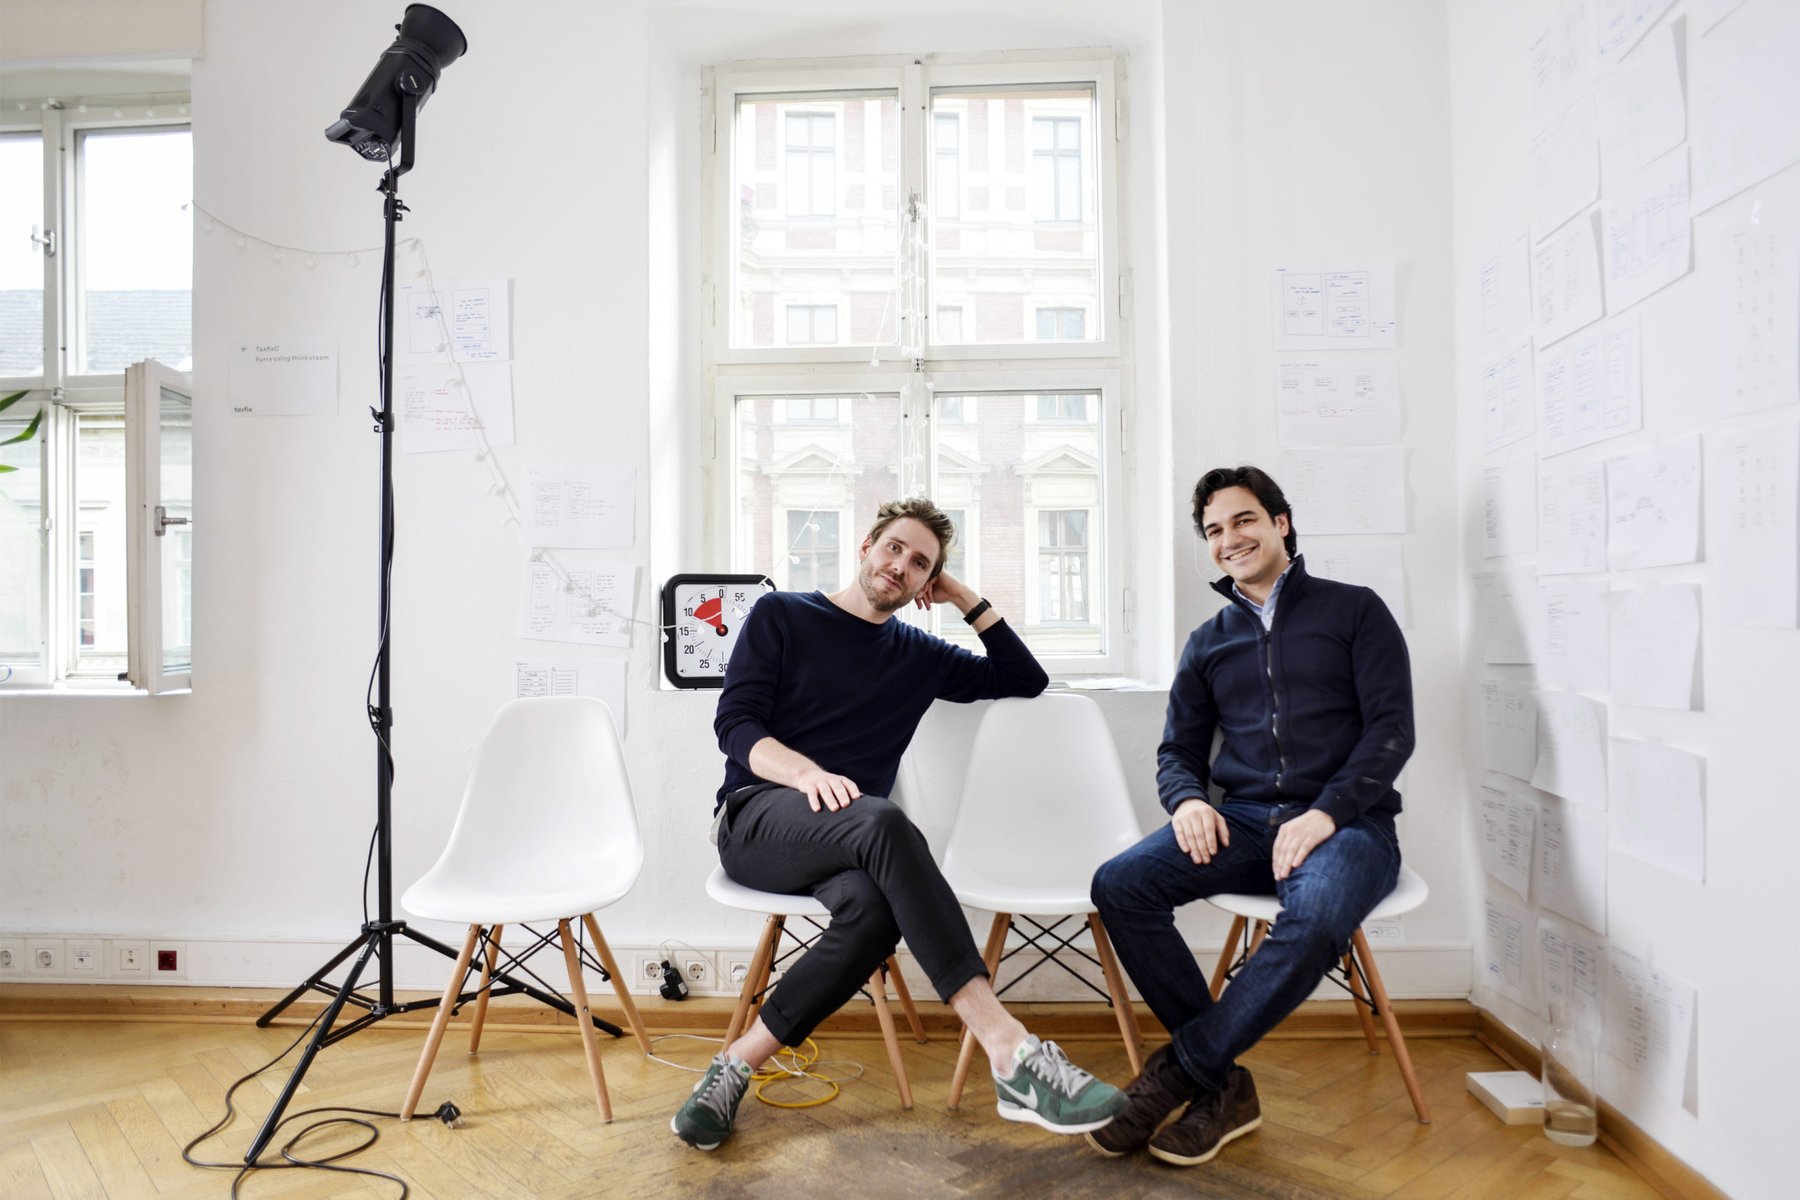 Taxfix has helped collect €270 million for its hundred thousands of users. The company was founded by Mathis Büchi (right) and Lino Teuteberg.